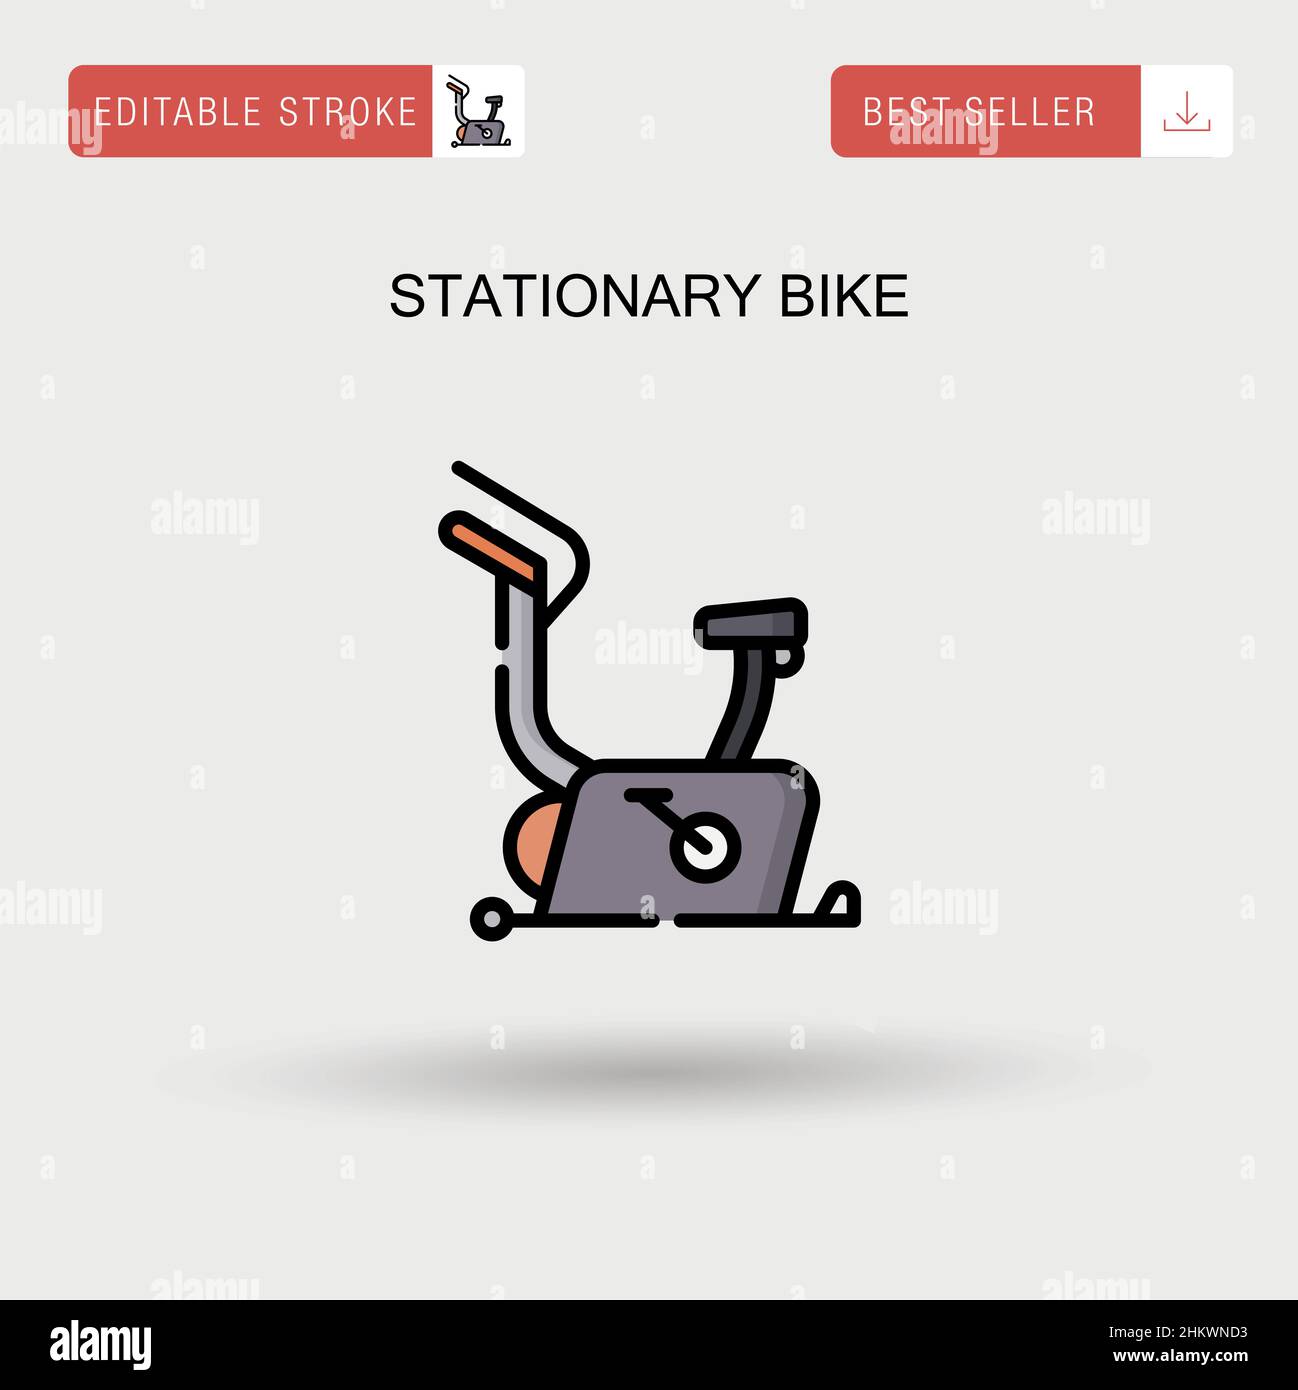 Stationary bike Simple vector icon. Stock Vector